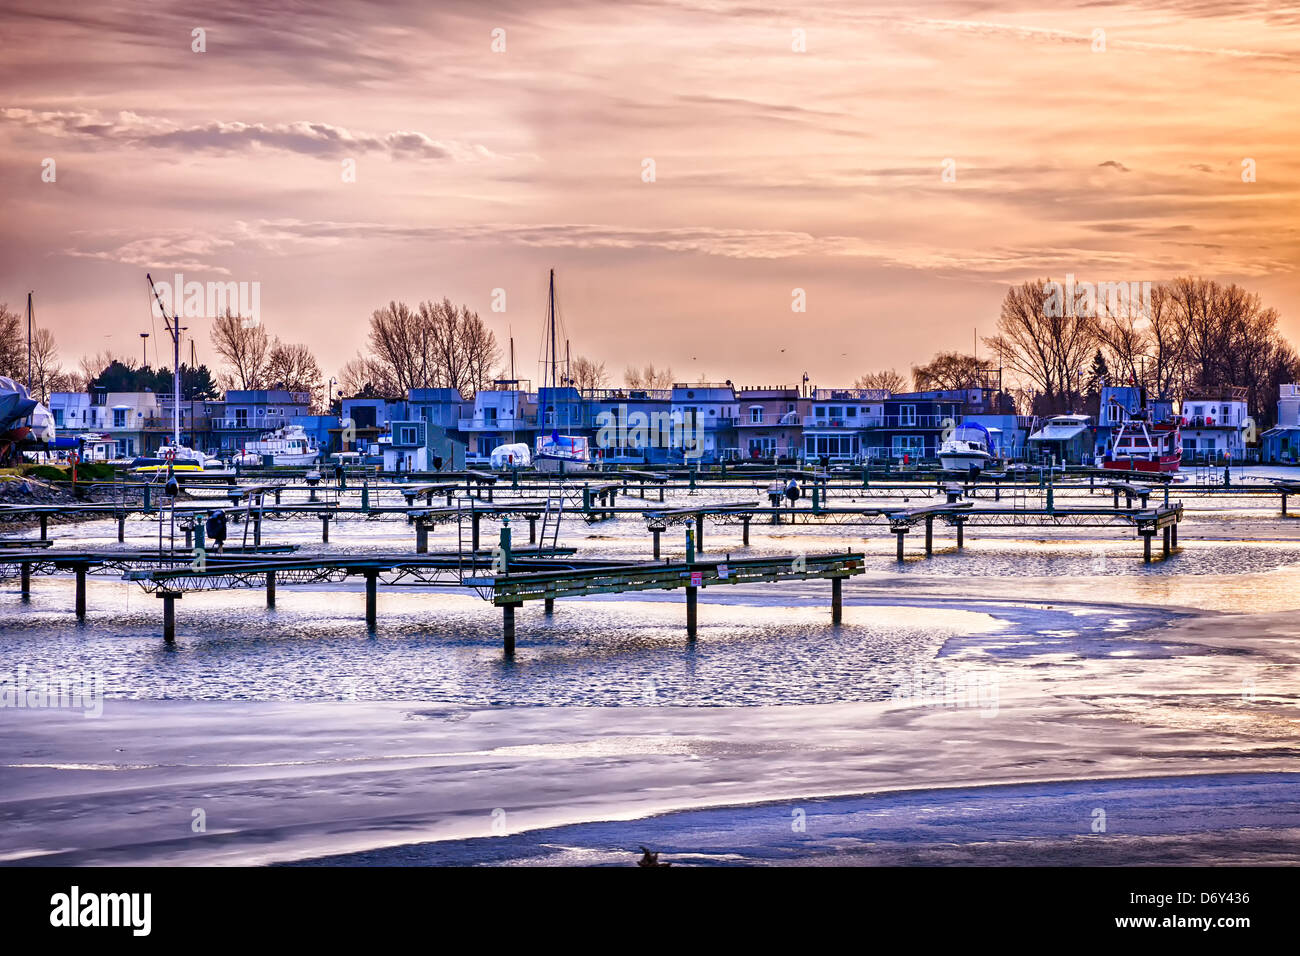 Sunset behind floating homes at Bluffers park marina in Toronto, Canada. Winter. Stock Photo